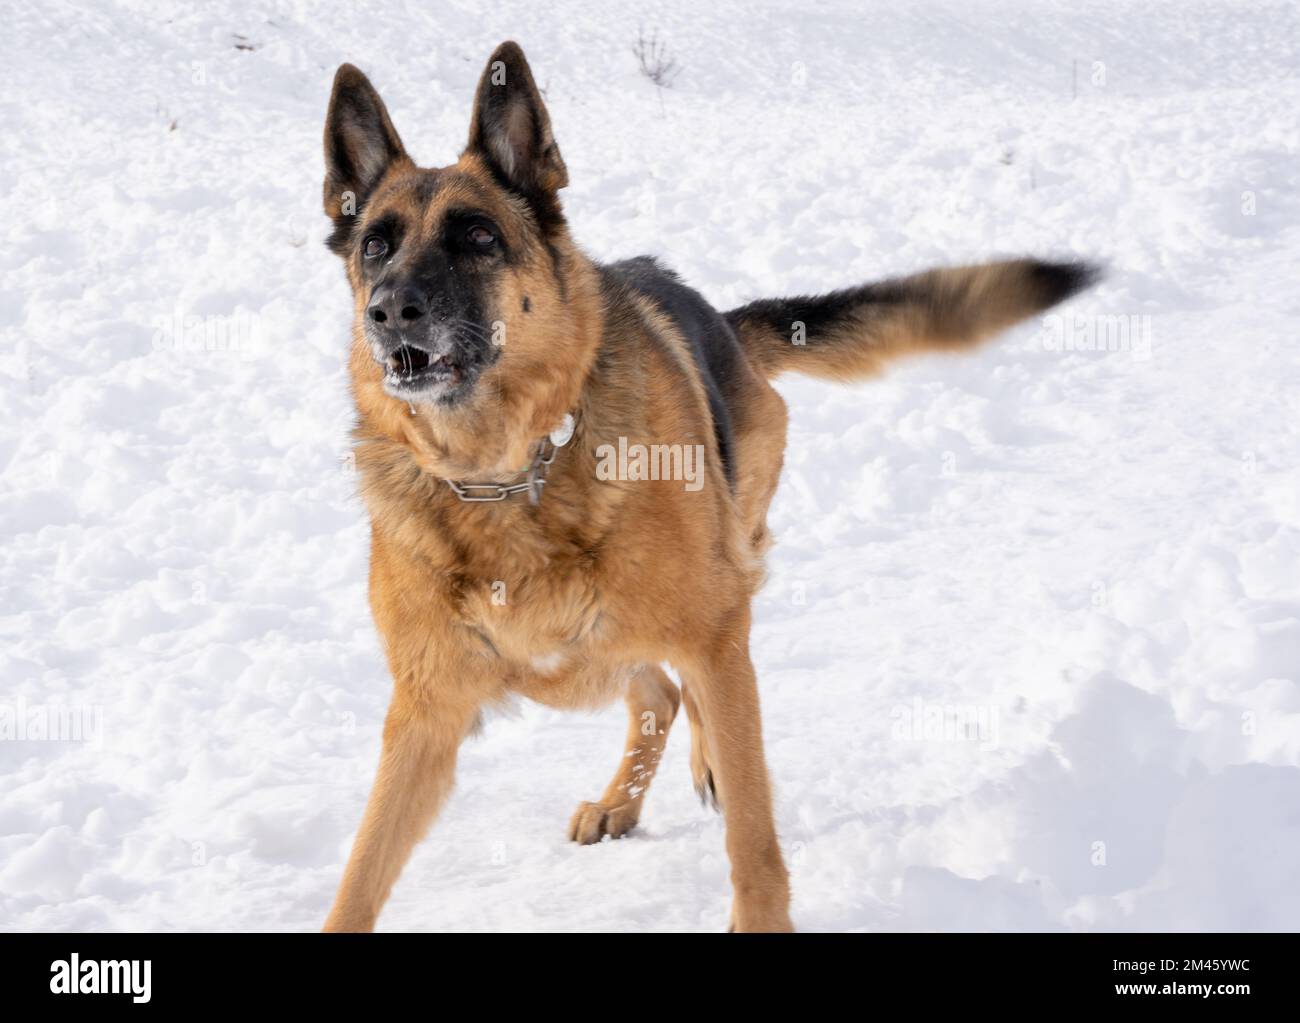 Dog playing outdoors in the snow. Animal and nature concept. Stock Photo